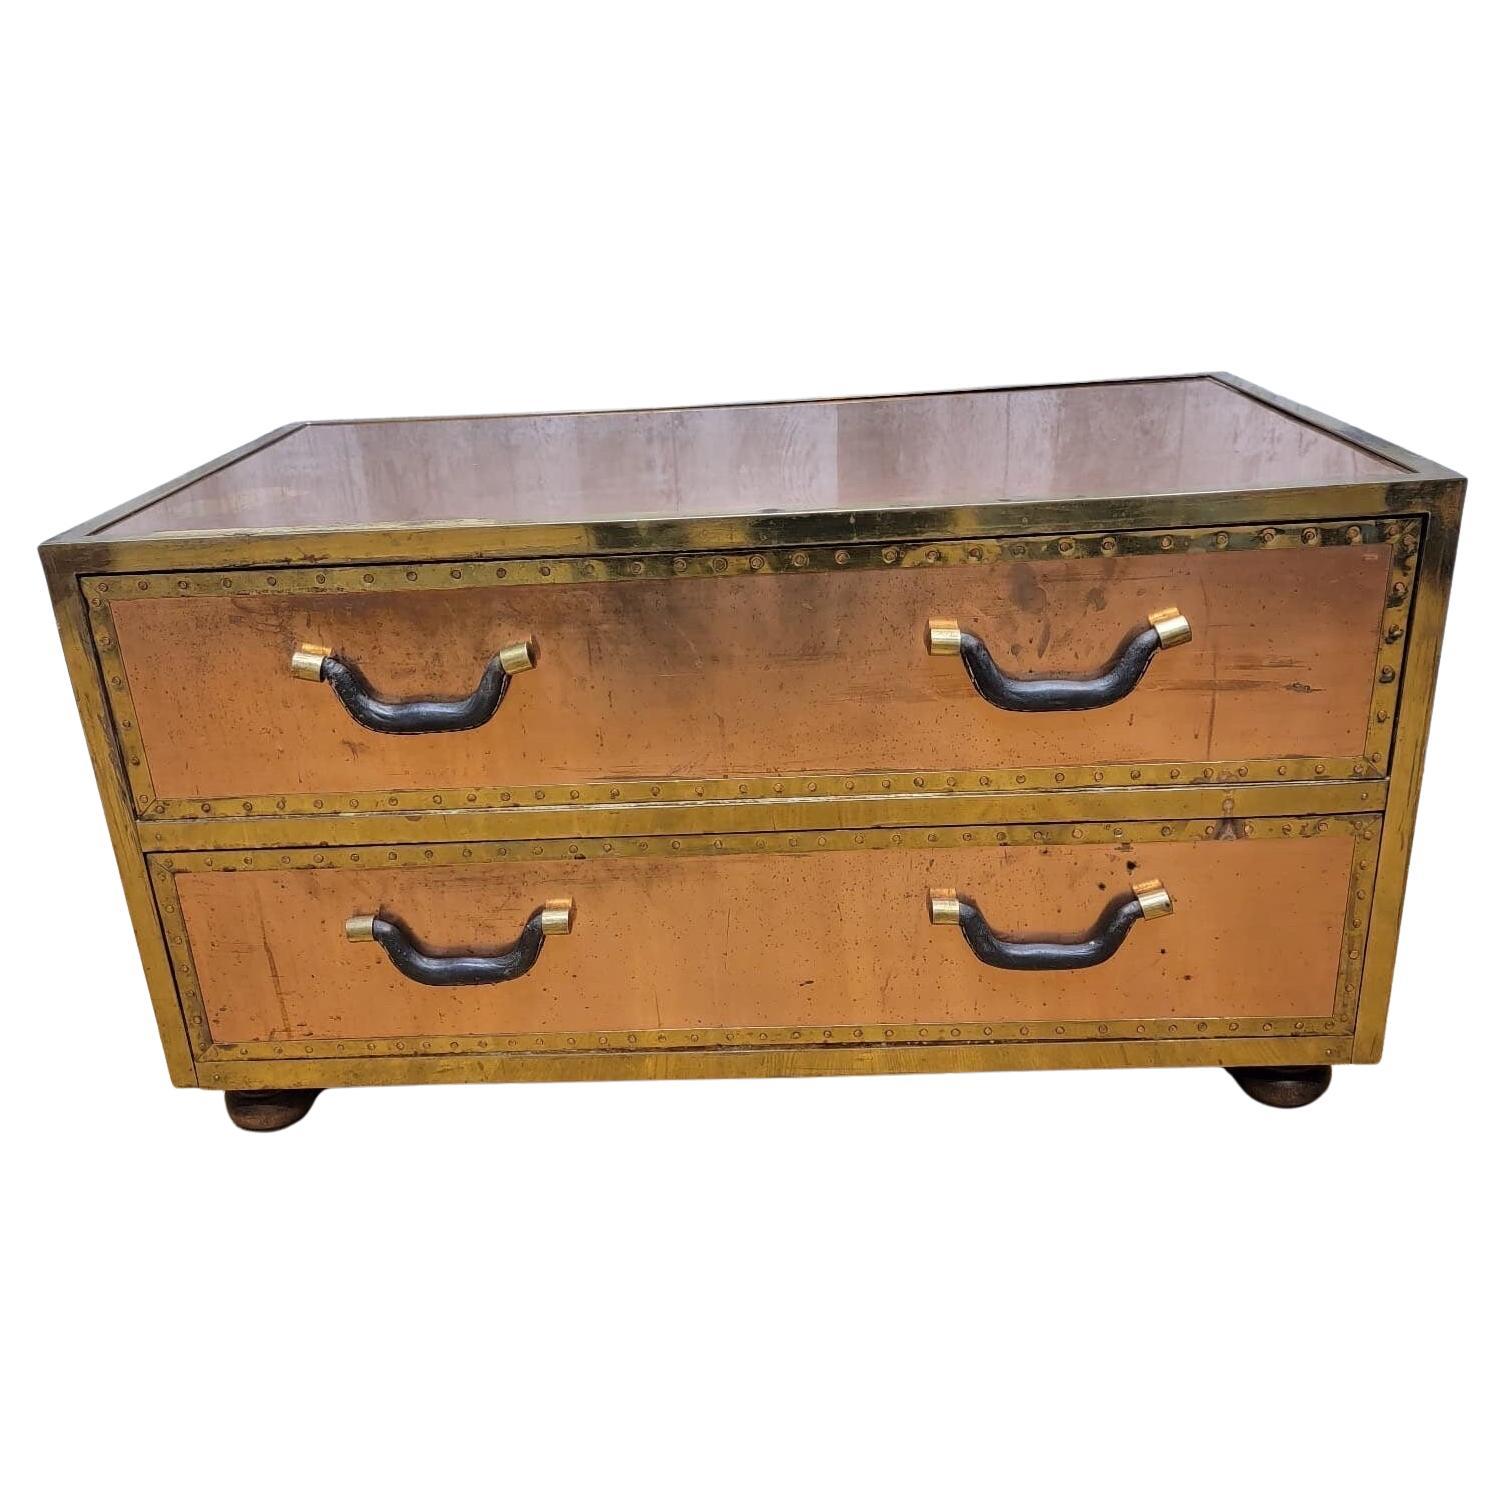 Vintage Copper Trunk Style Coffee Table with Leather Handles